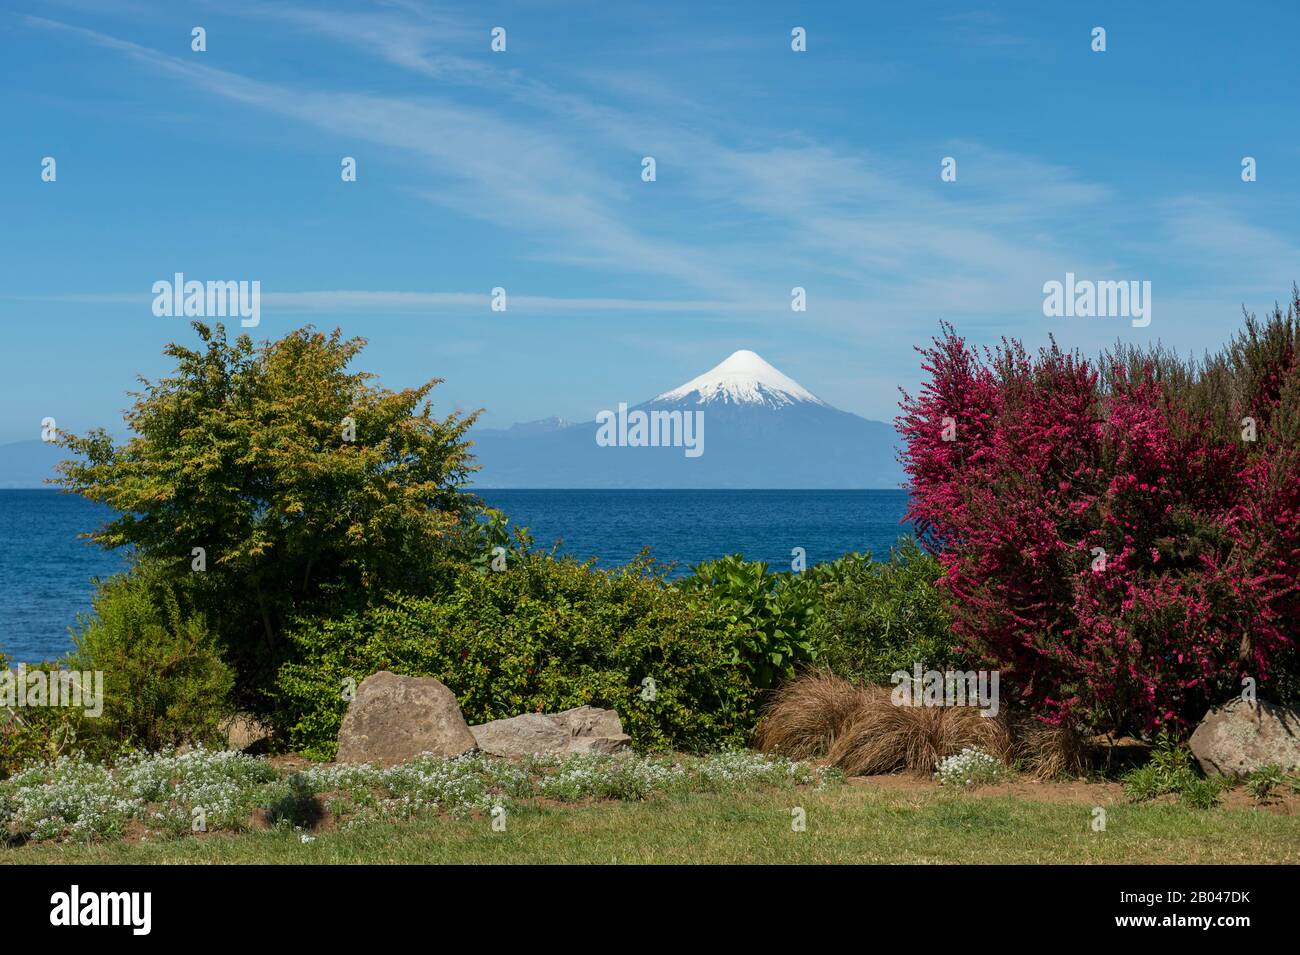 View of Lake Llanquihue with Osorno Volcano in background from Frutillar, a small town in the Lake District near Puerto Montt, Chile. Stock Photo